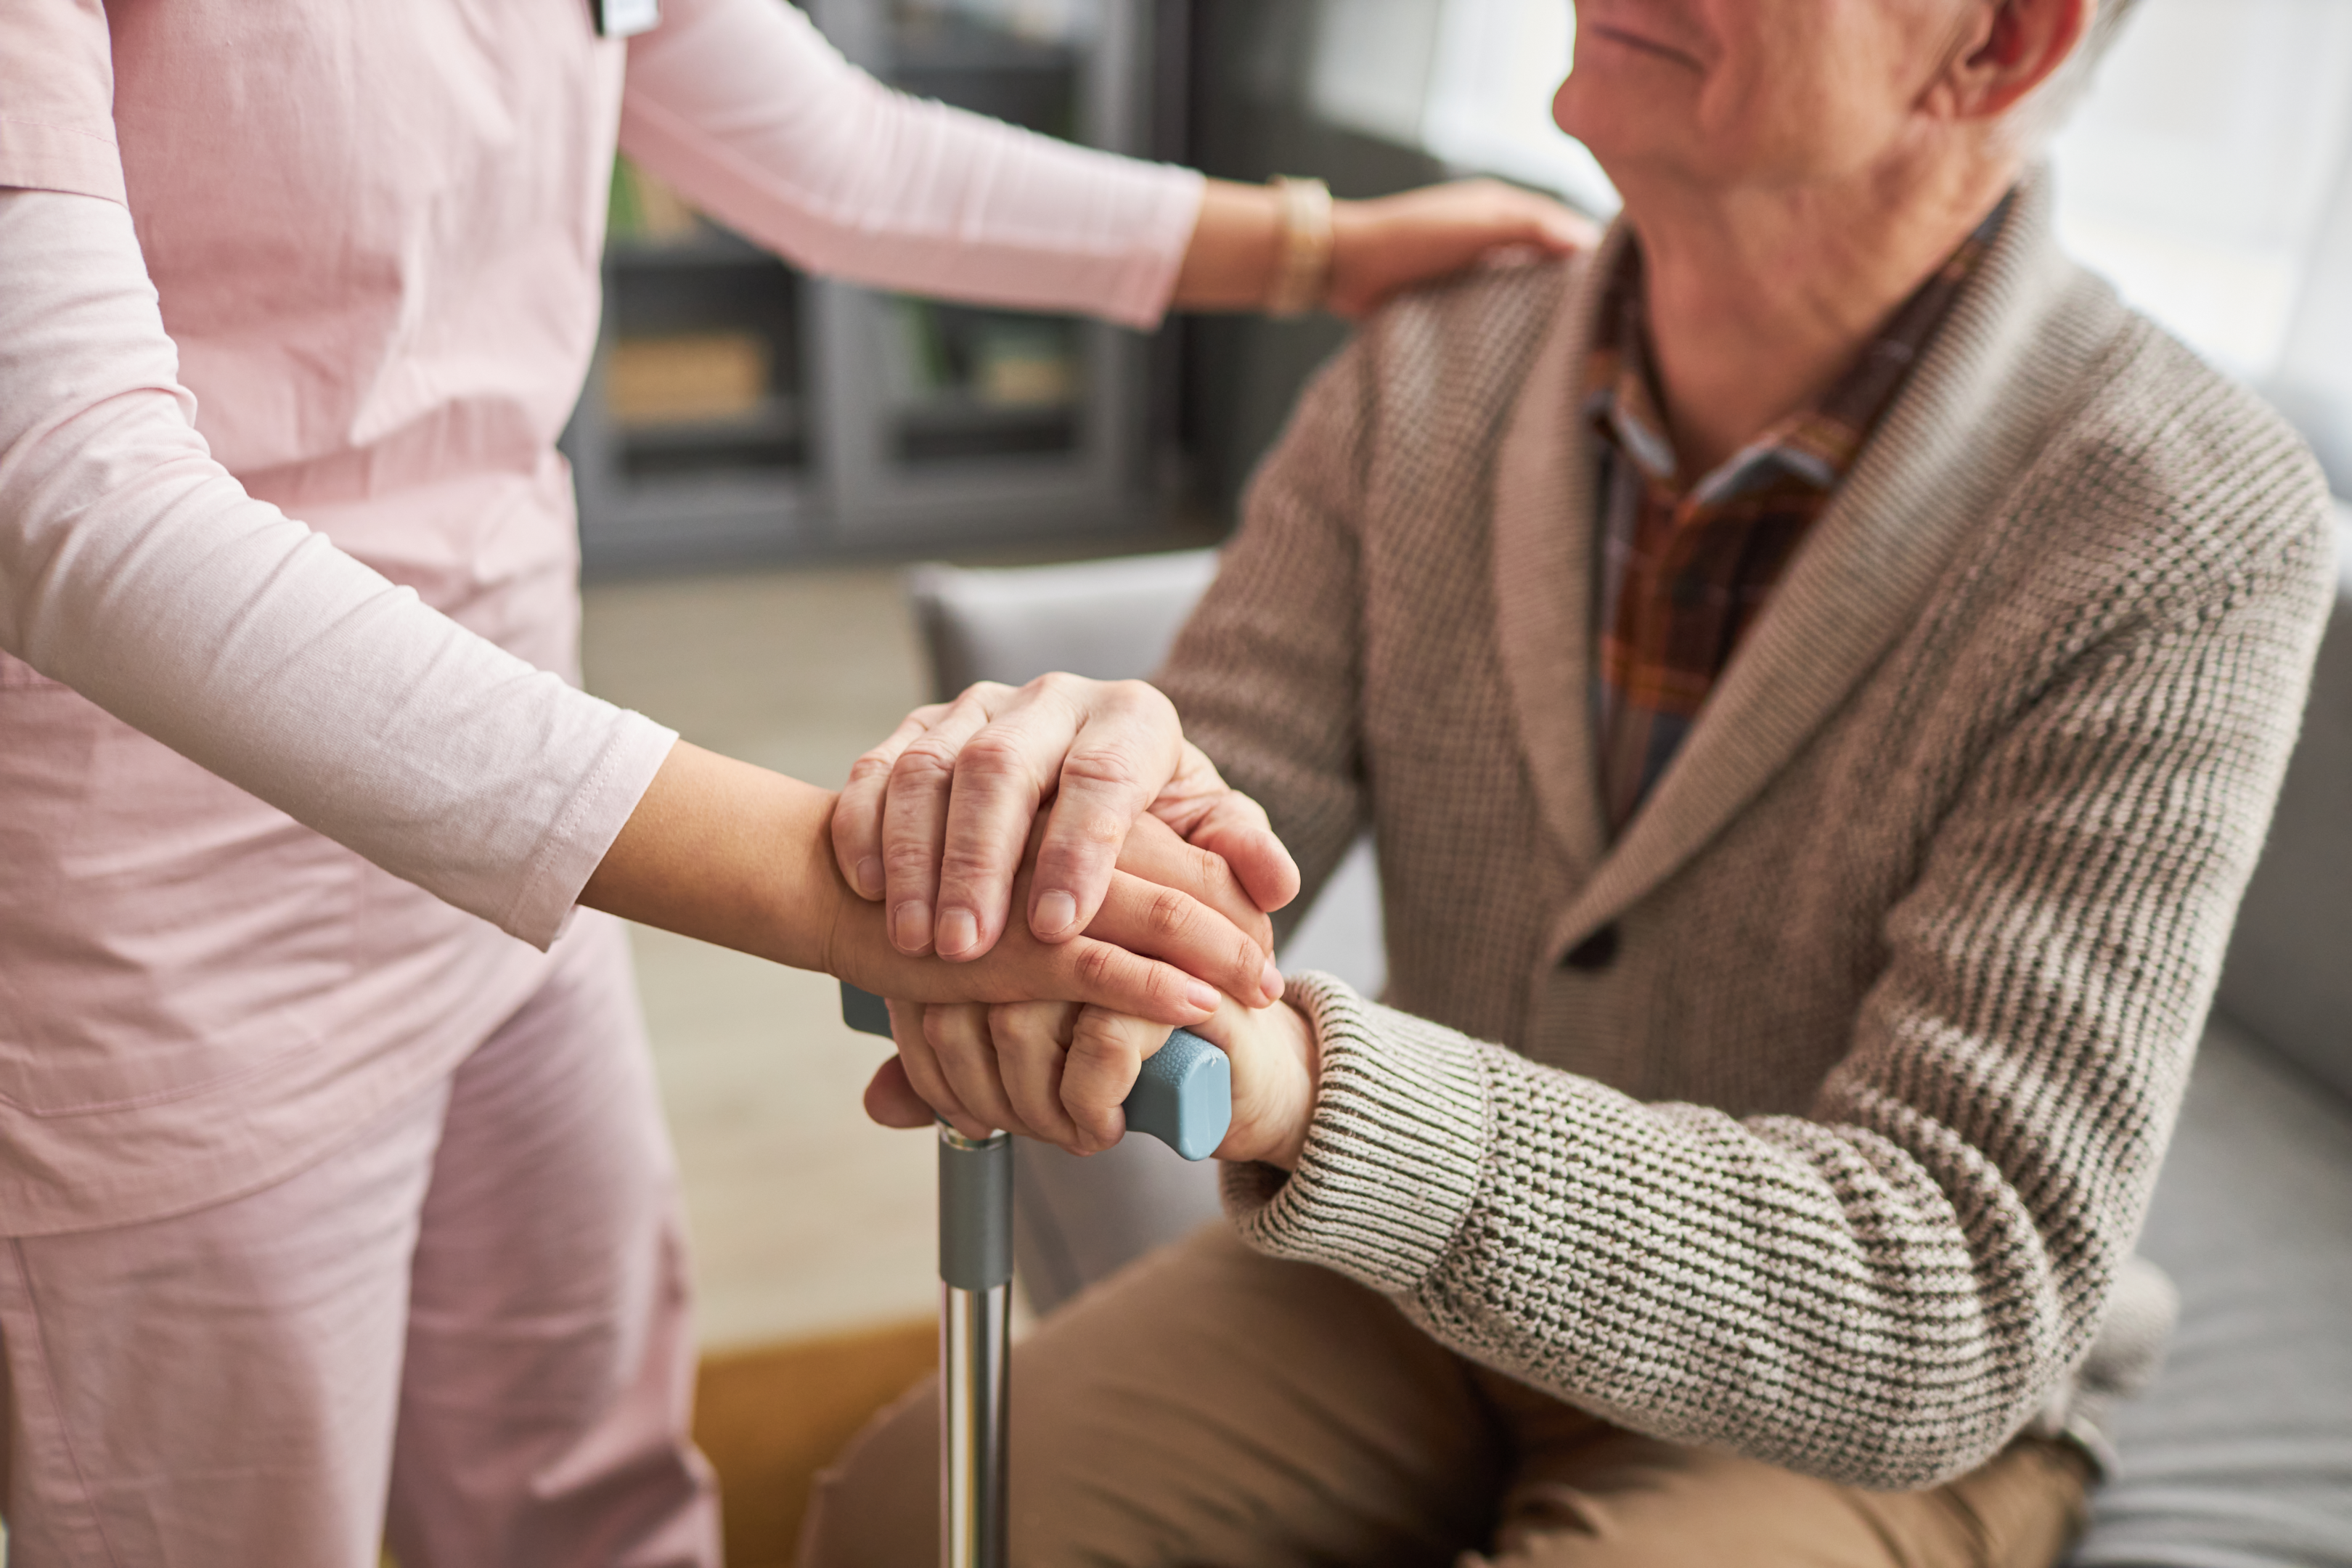 A caring hand holding an elderly person's hand, highlighting the duty of care towards vulnerable populations